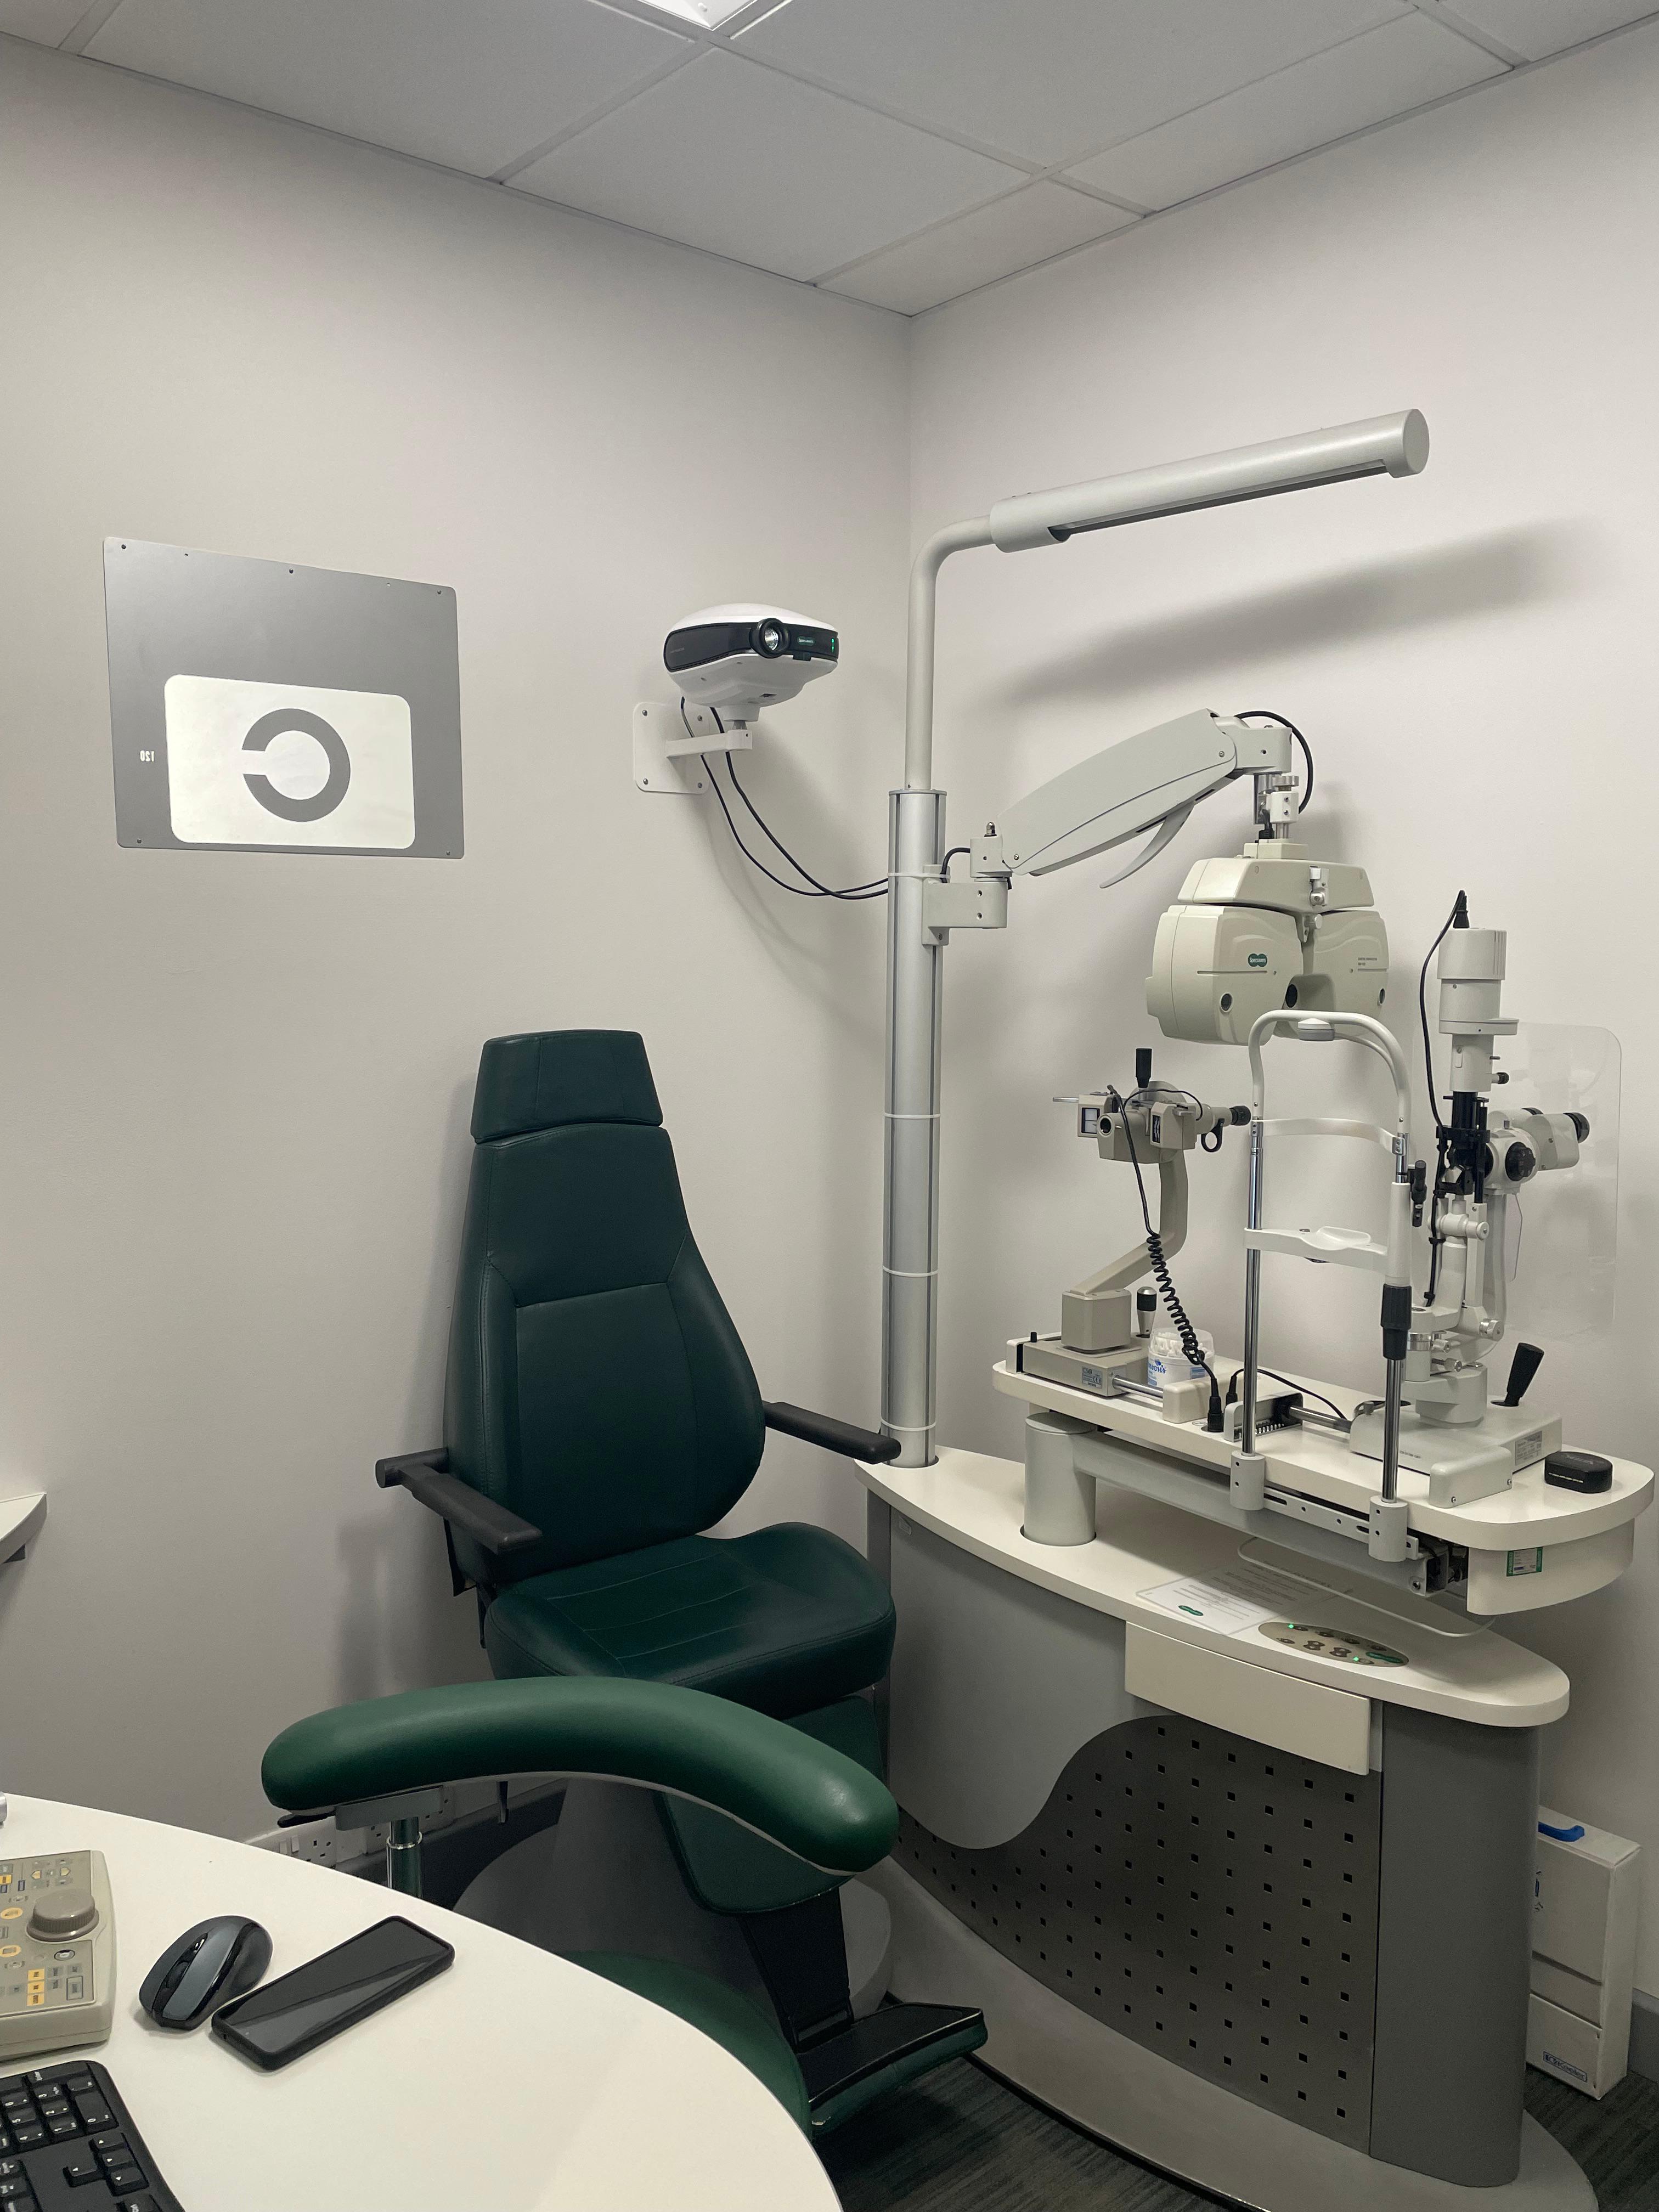 Images Specsavers Opticians and Audiologists - Middlebrook